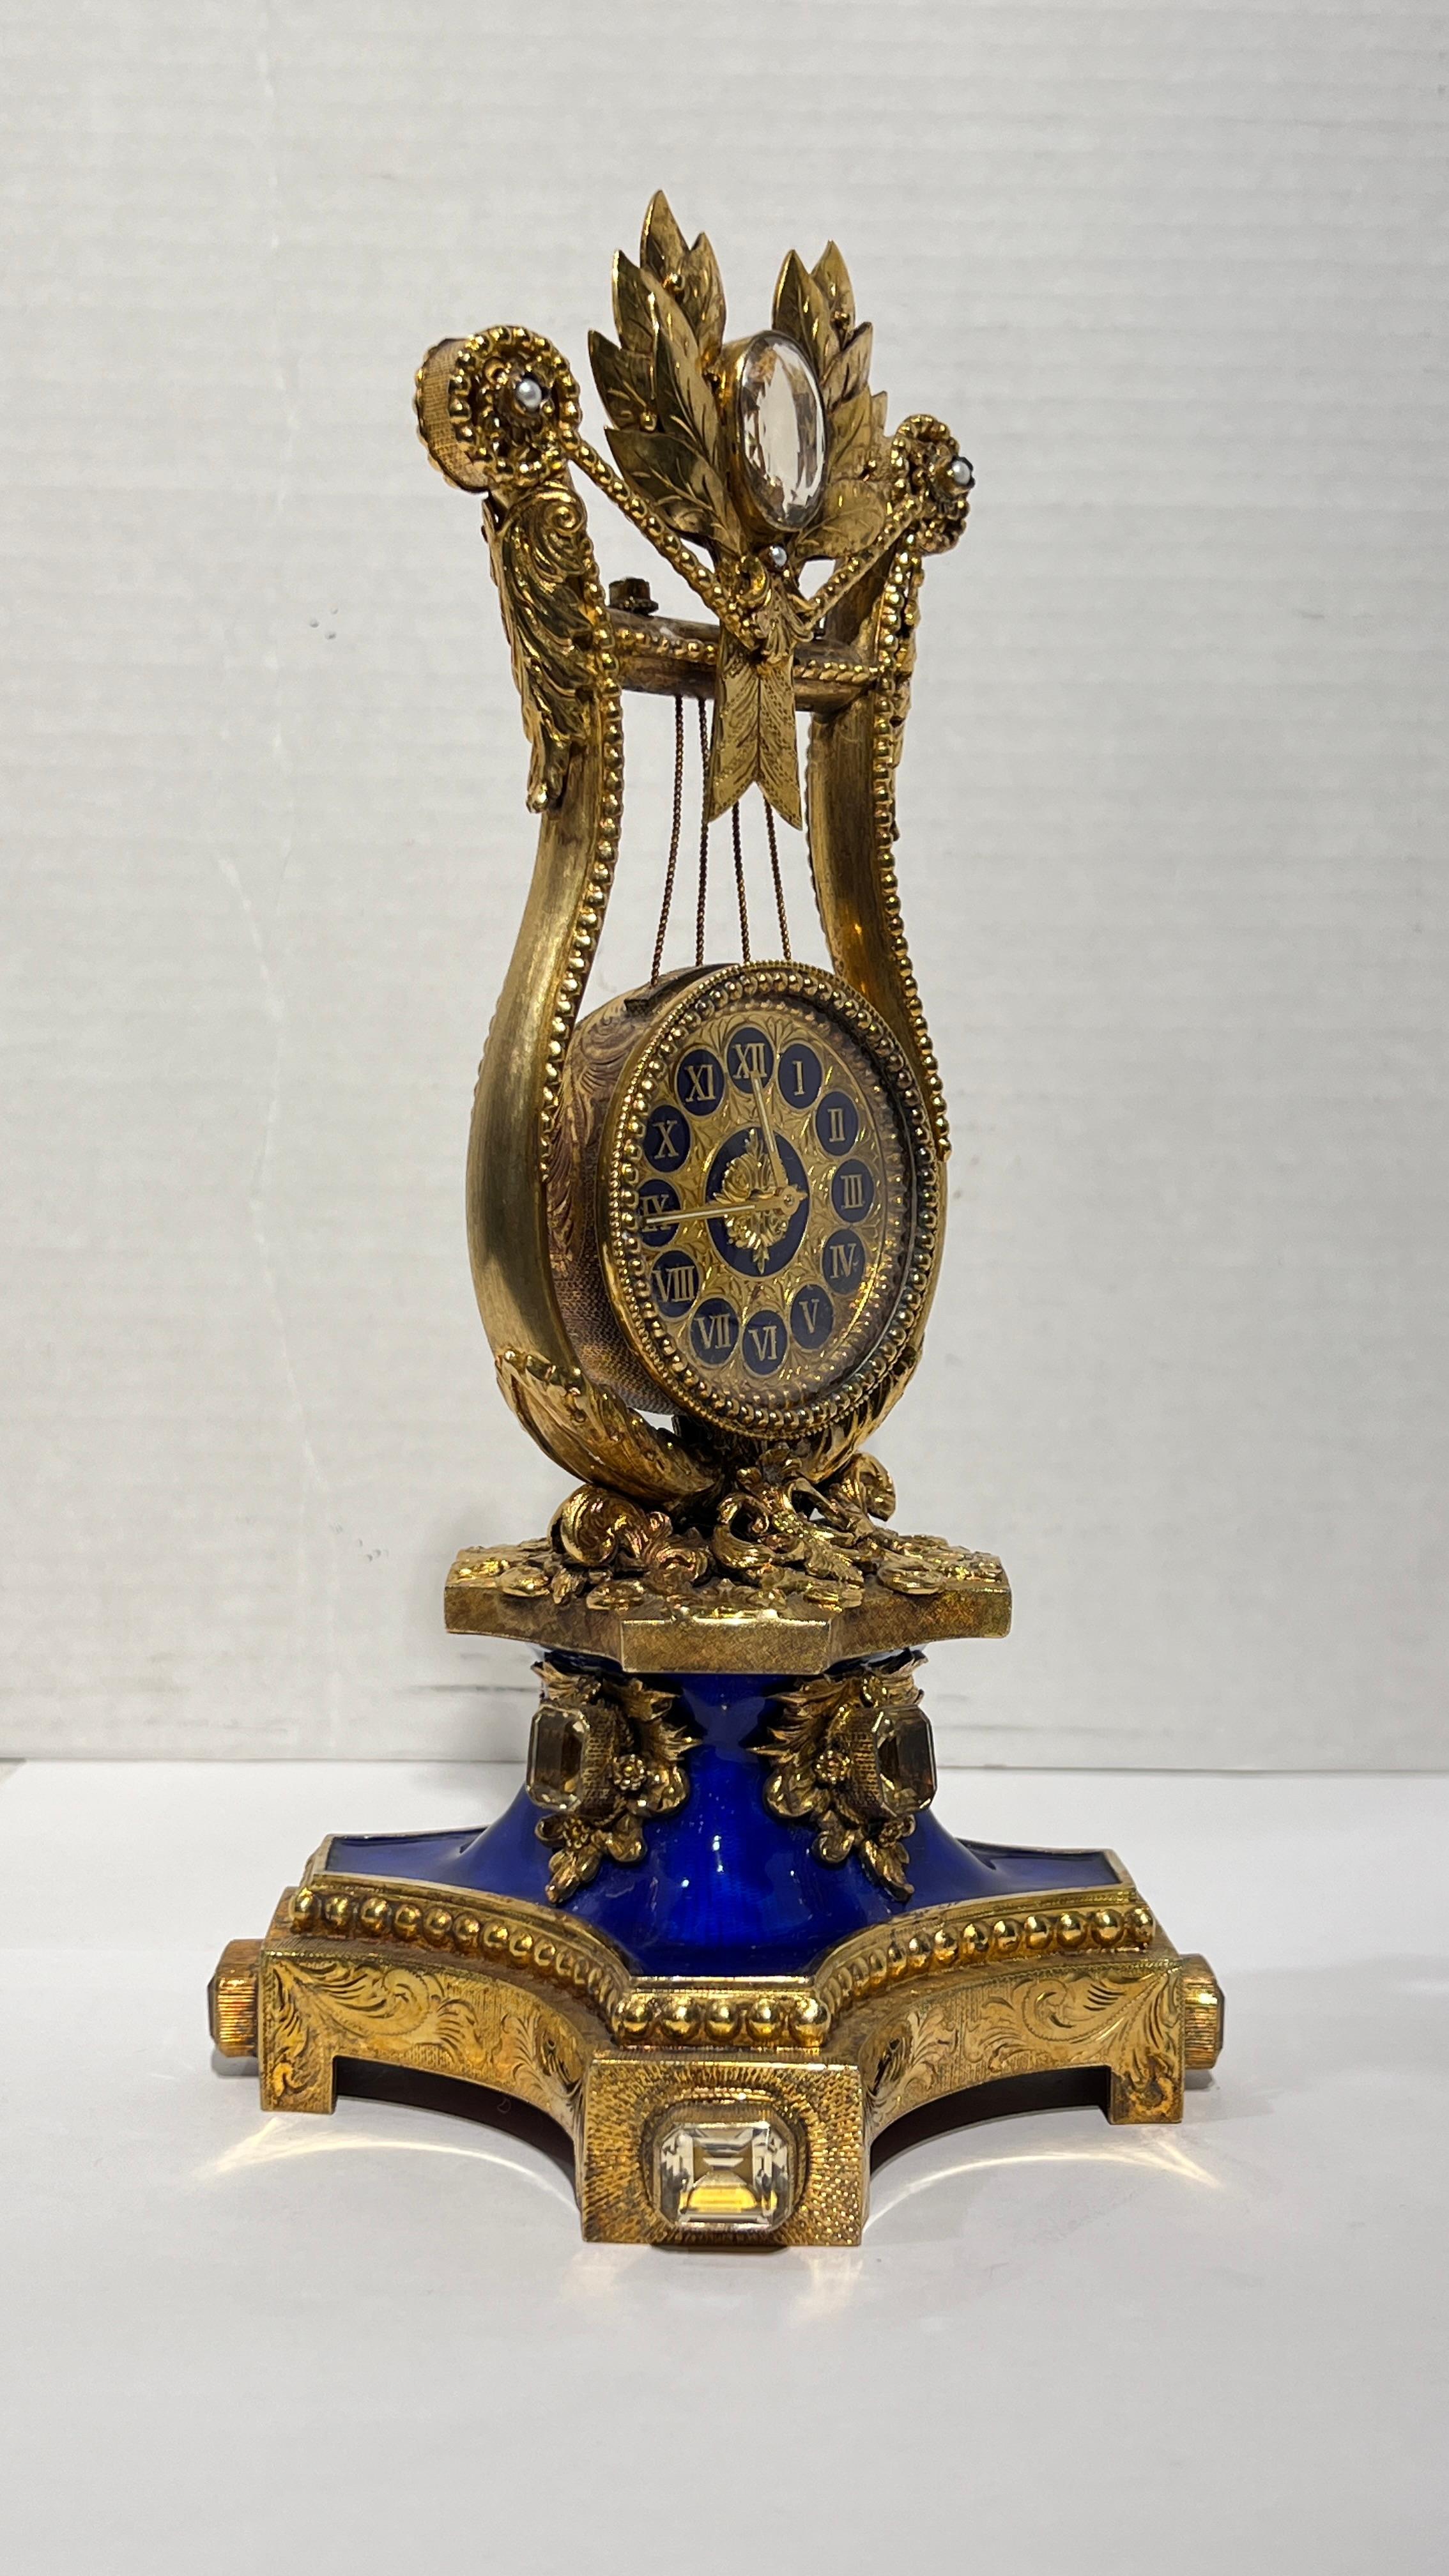 Lovely  musical Vintage Astro Hungerian Enameled Silver Gilt Musical Clock the movment is  by Reuge of Switzerland, of lyre form and exquisitely crafted from gilt silver with blue enamel and inset glass jewels.  Music box in fine working order.  